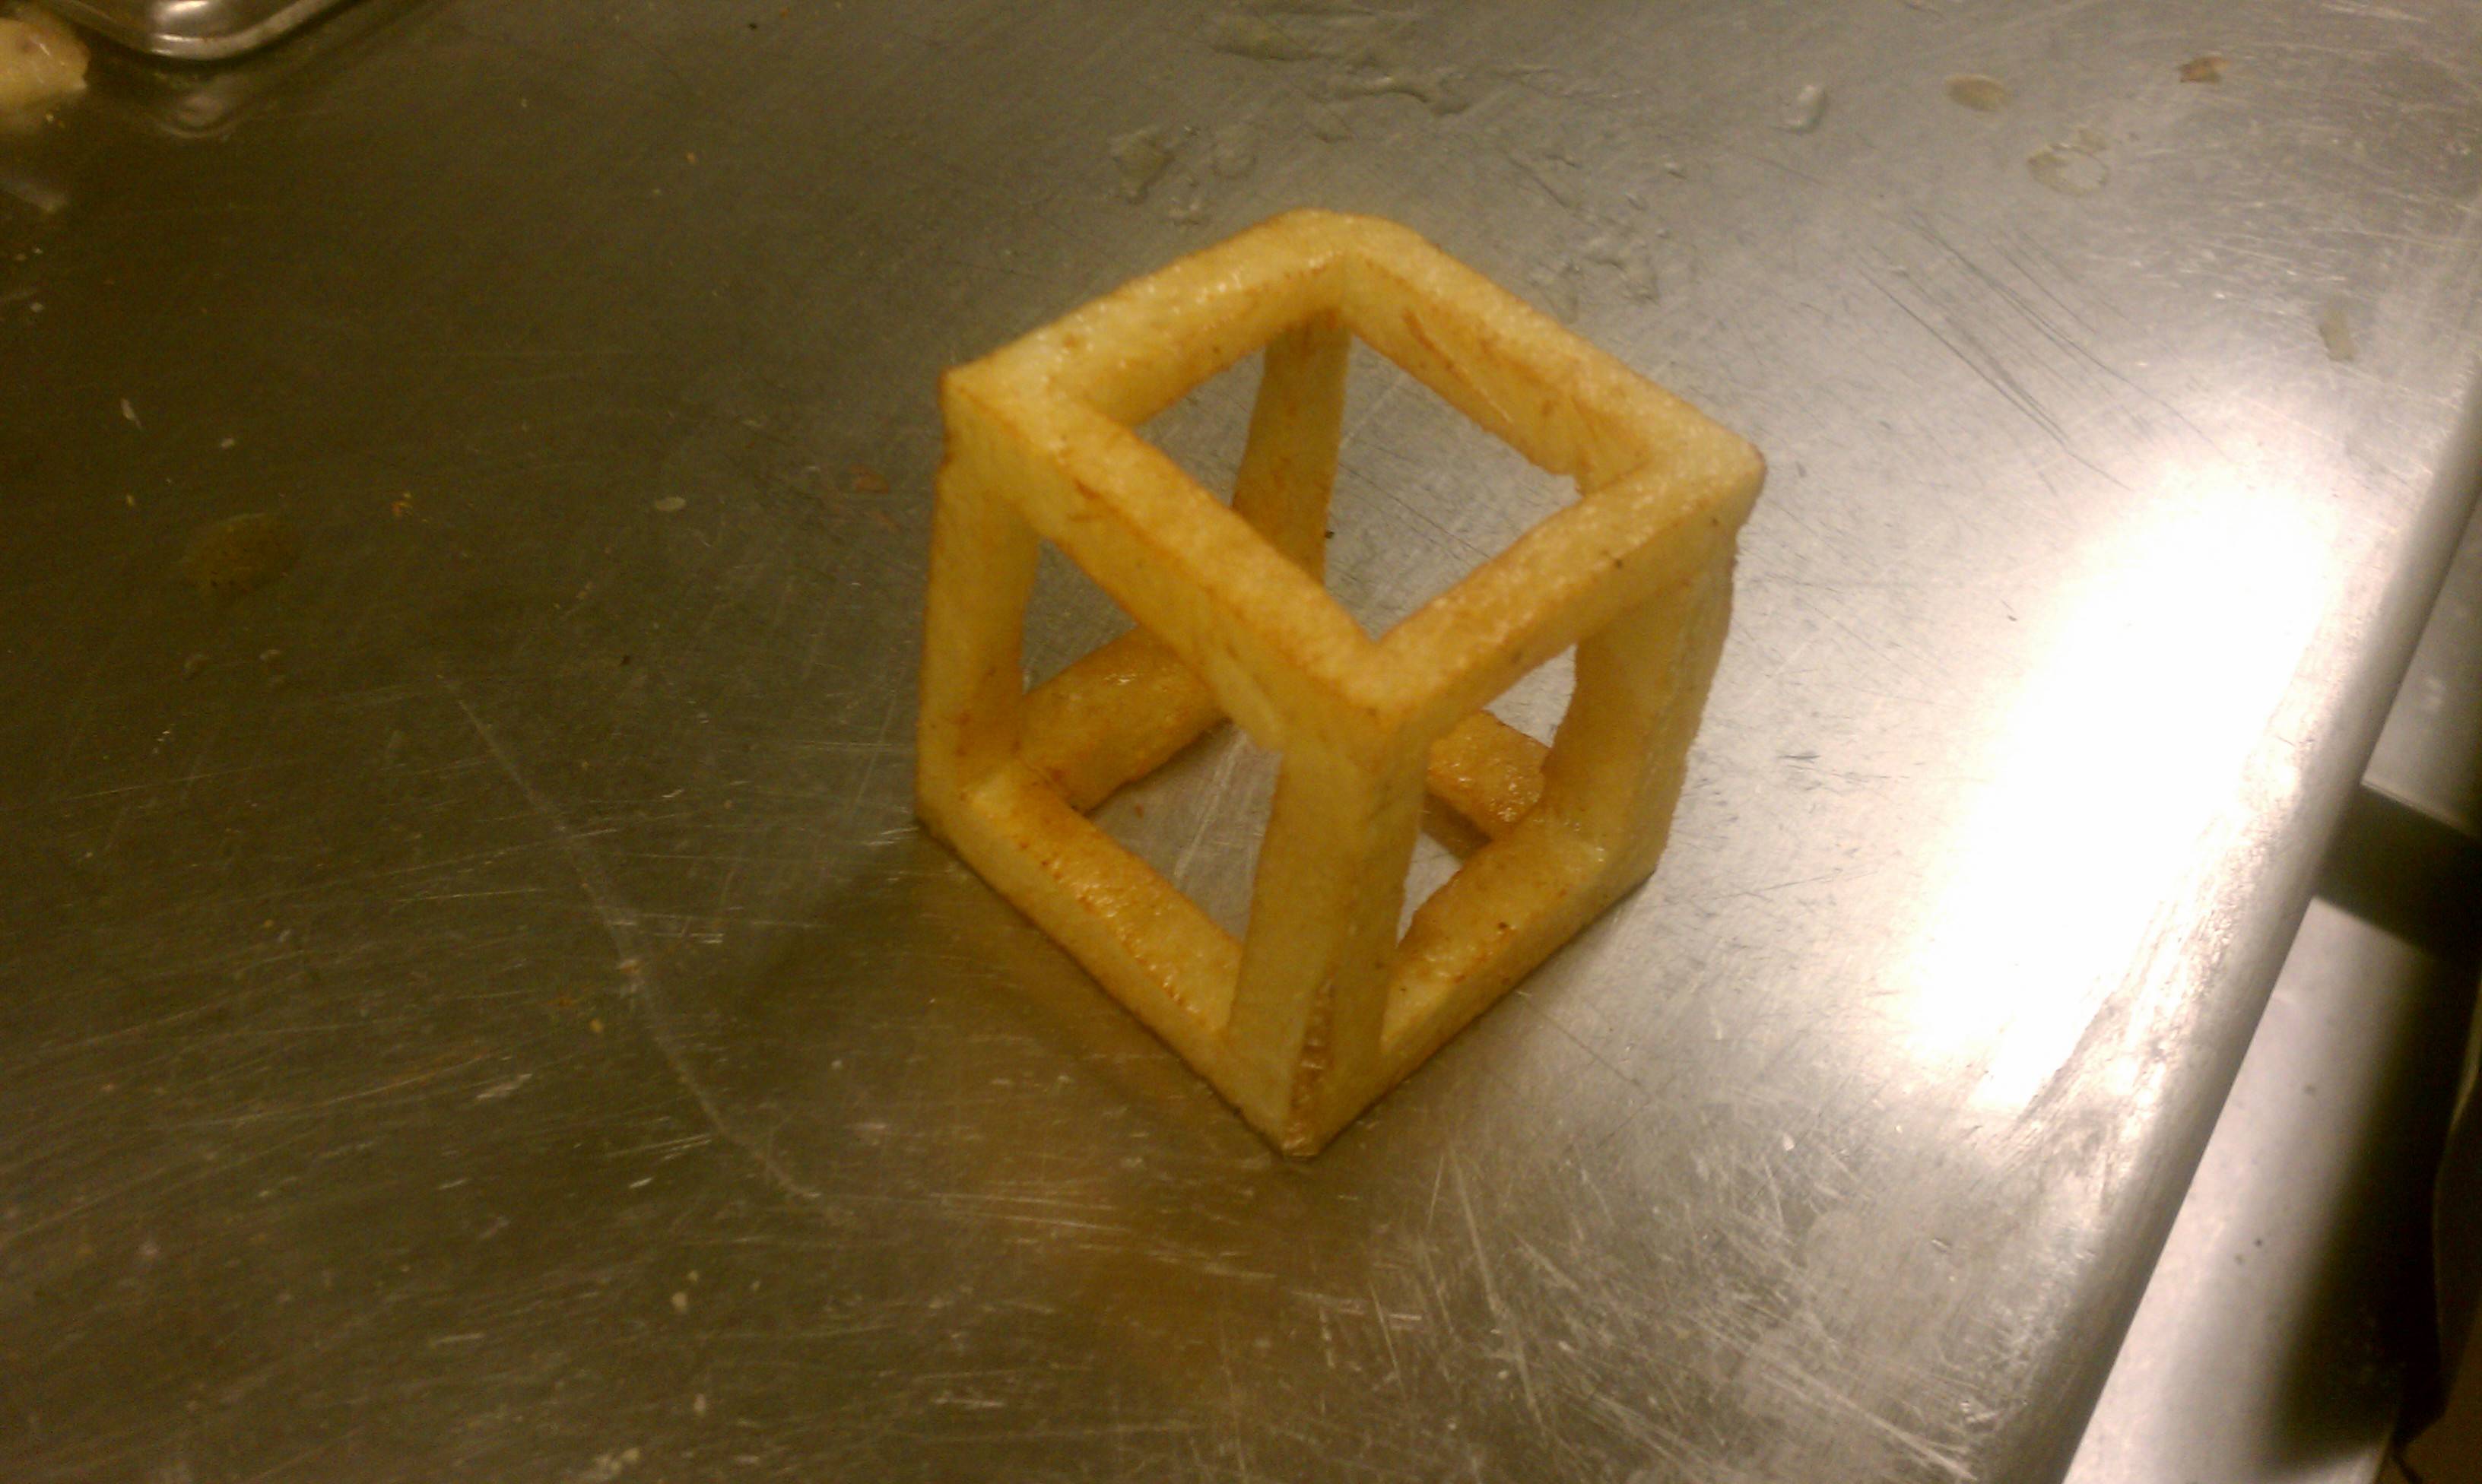 I give you the French fry cube.